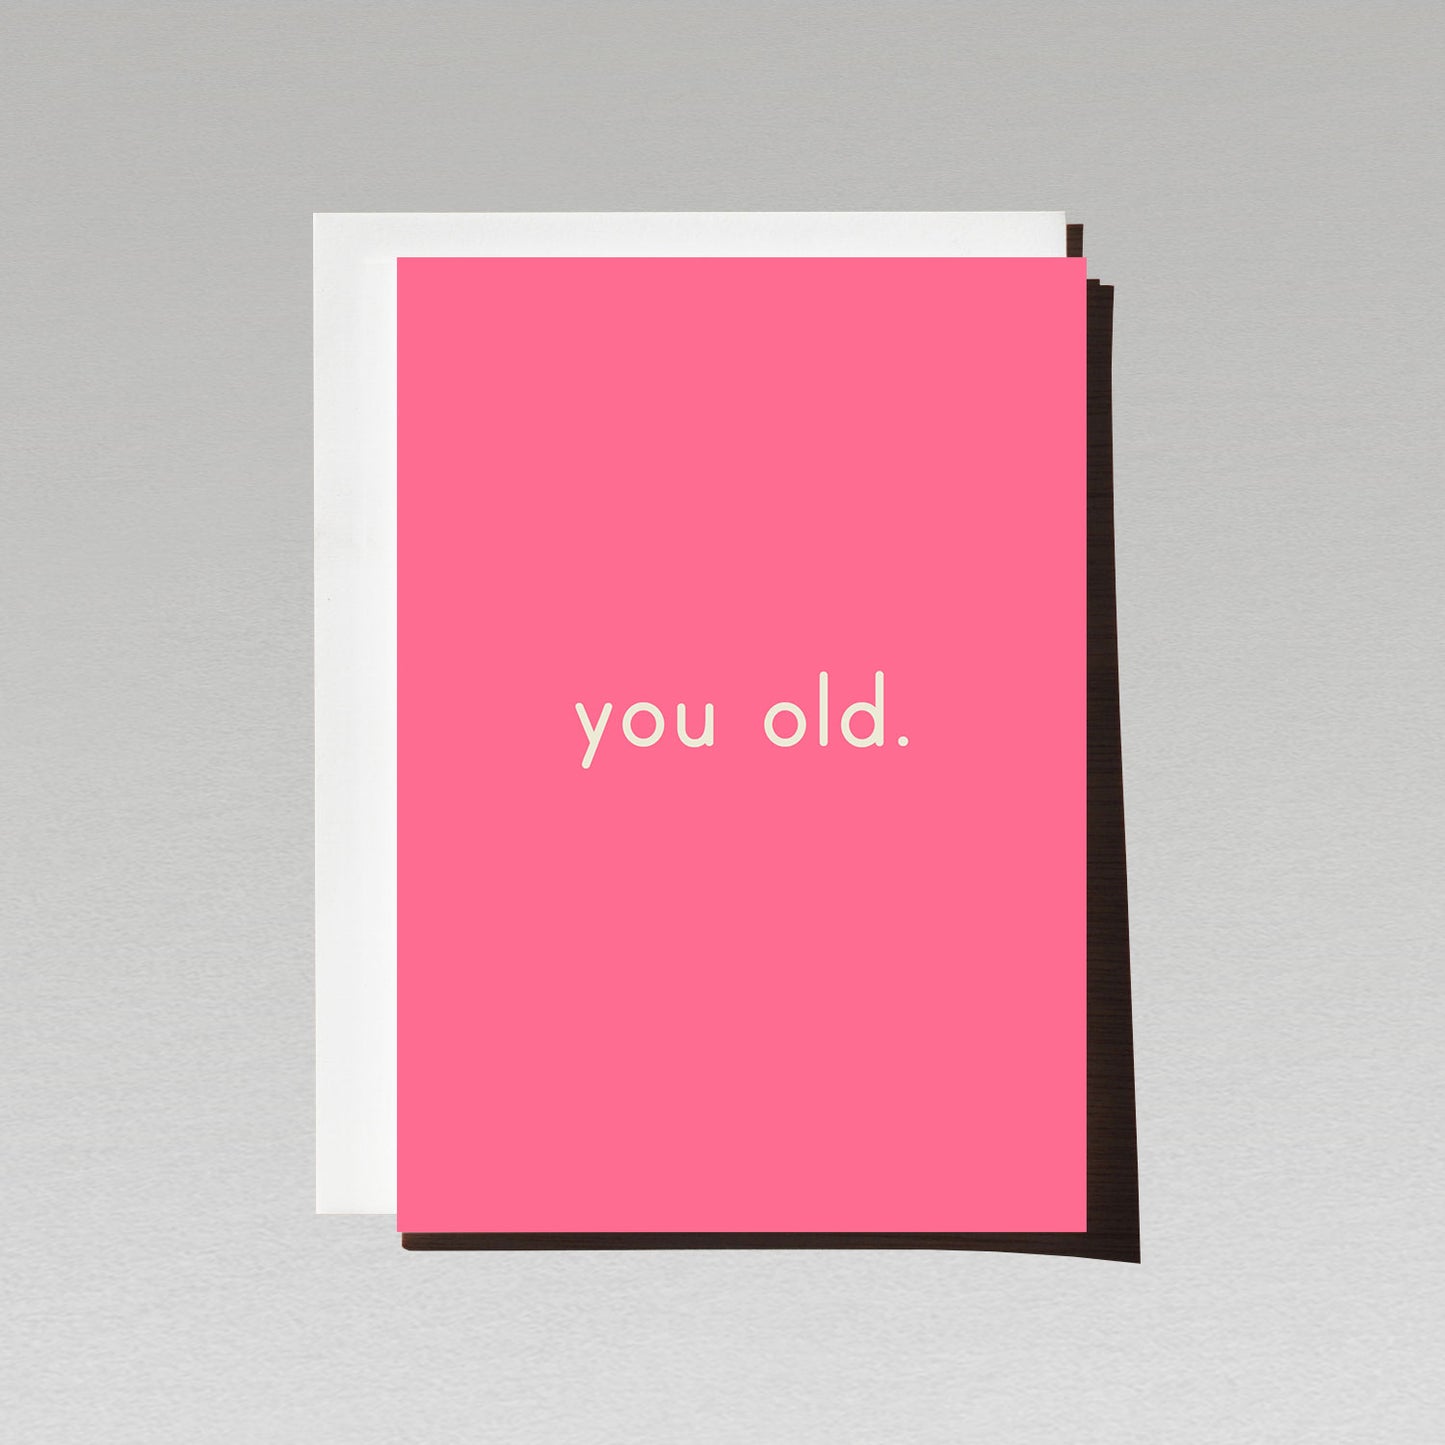 Birthday card with minimalist white text you old. on bright pink background